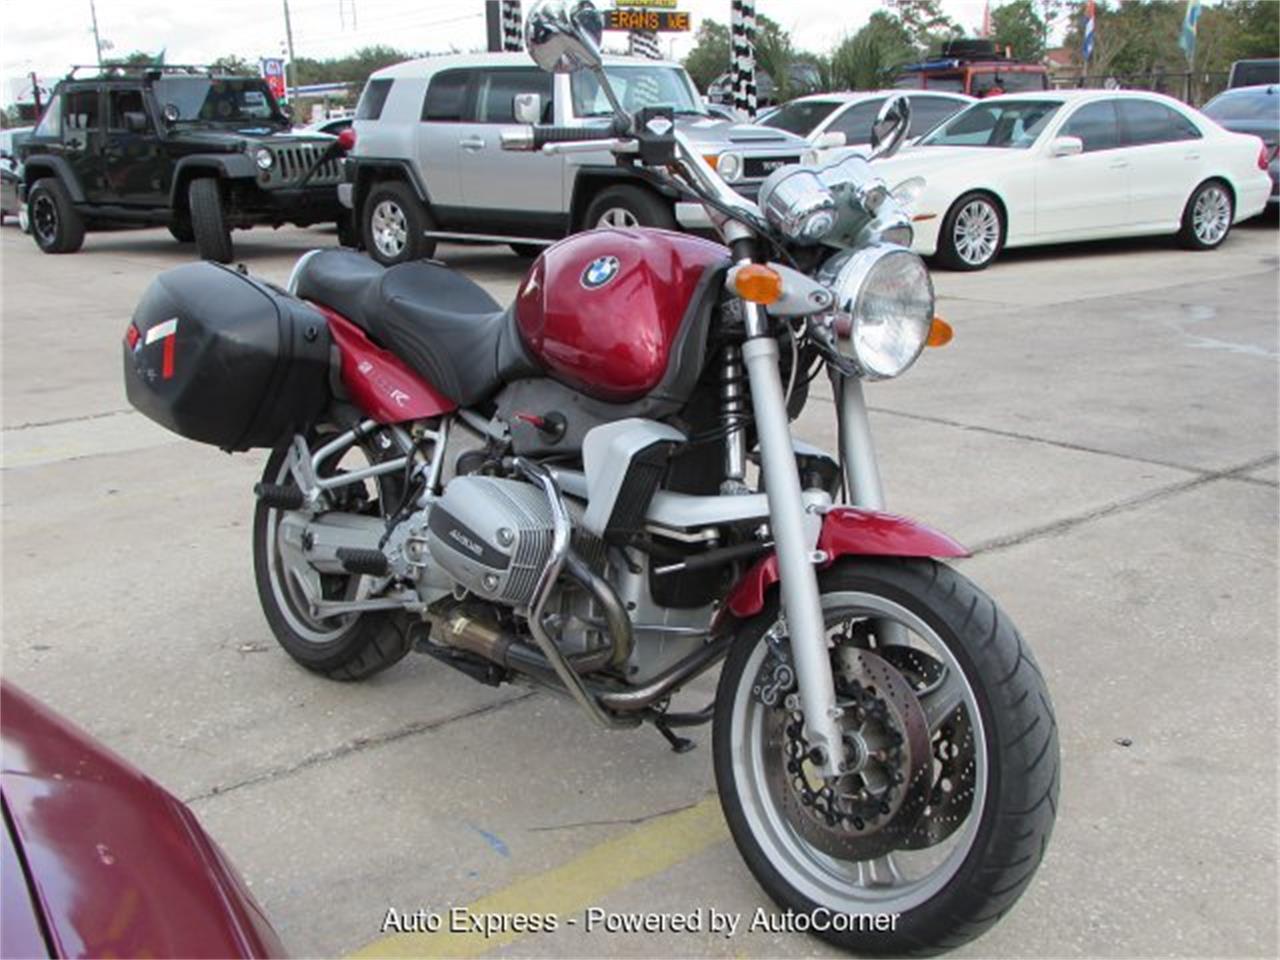 1998 BMW Motorcycle for Sale | ClassicCars.com | CC-1134836